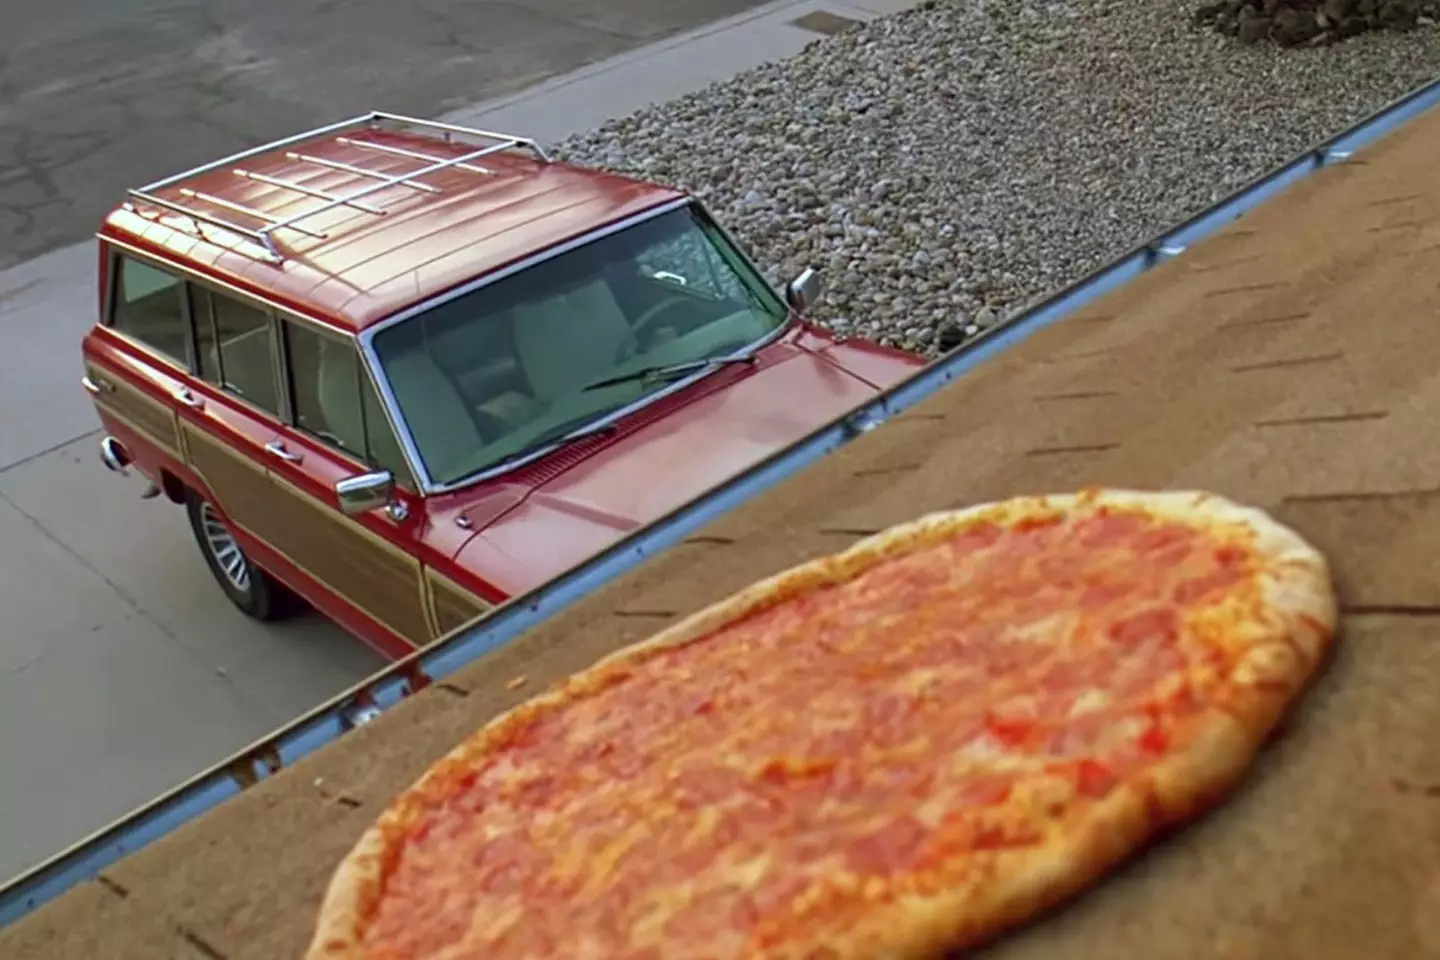 The owners had to install a massive fence to stop people throwing pizza on the roof.